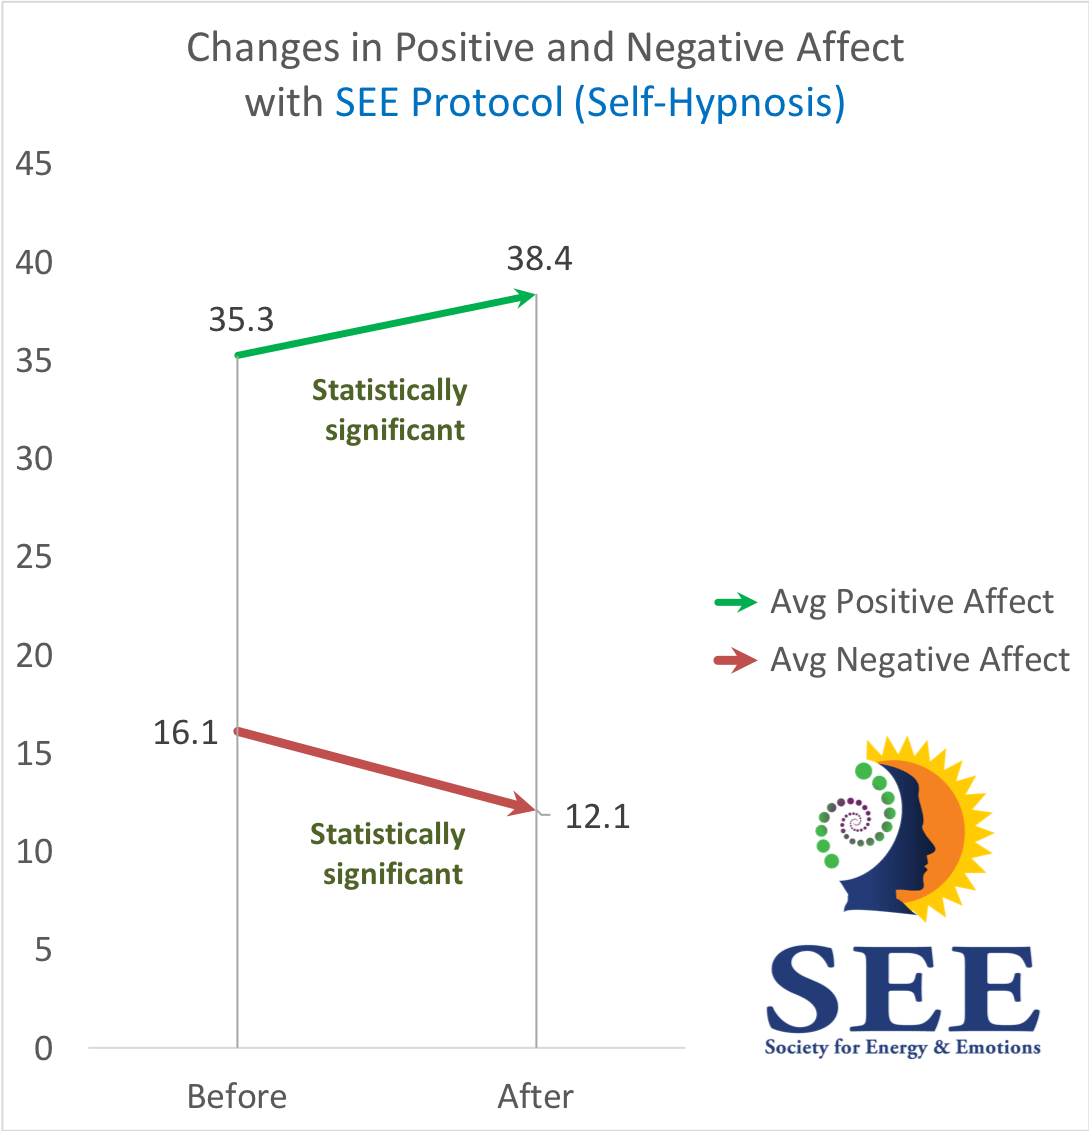 Changes in mood for the SEE Protocol for Self-hypnosis